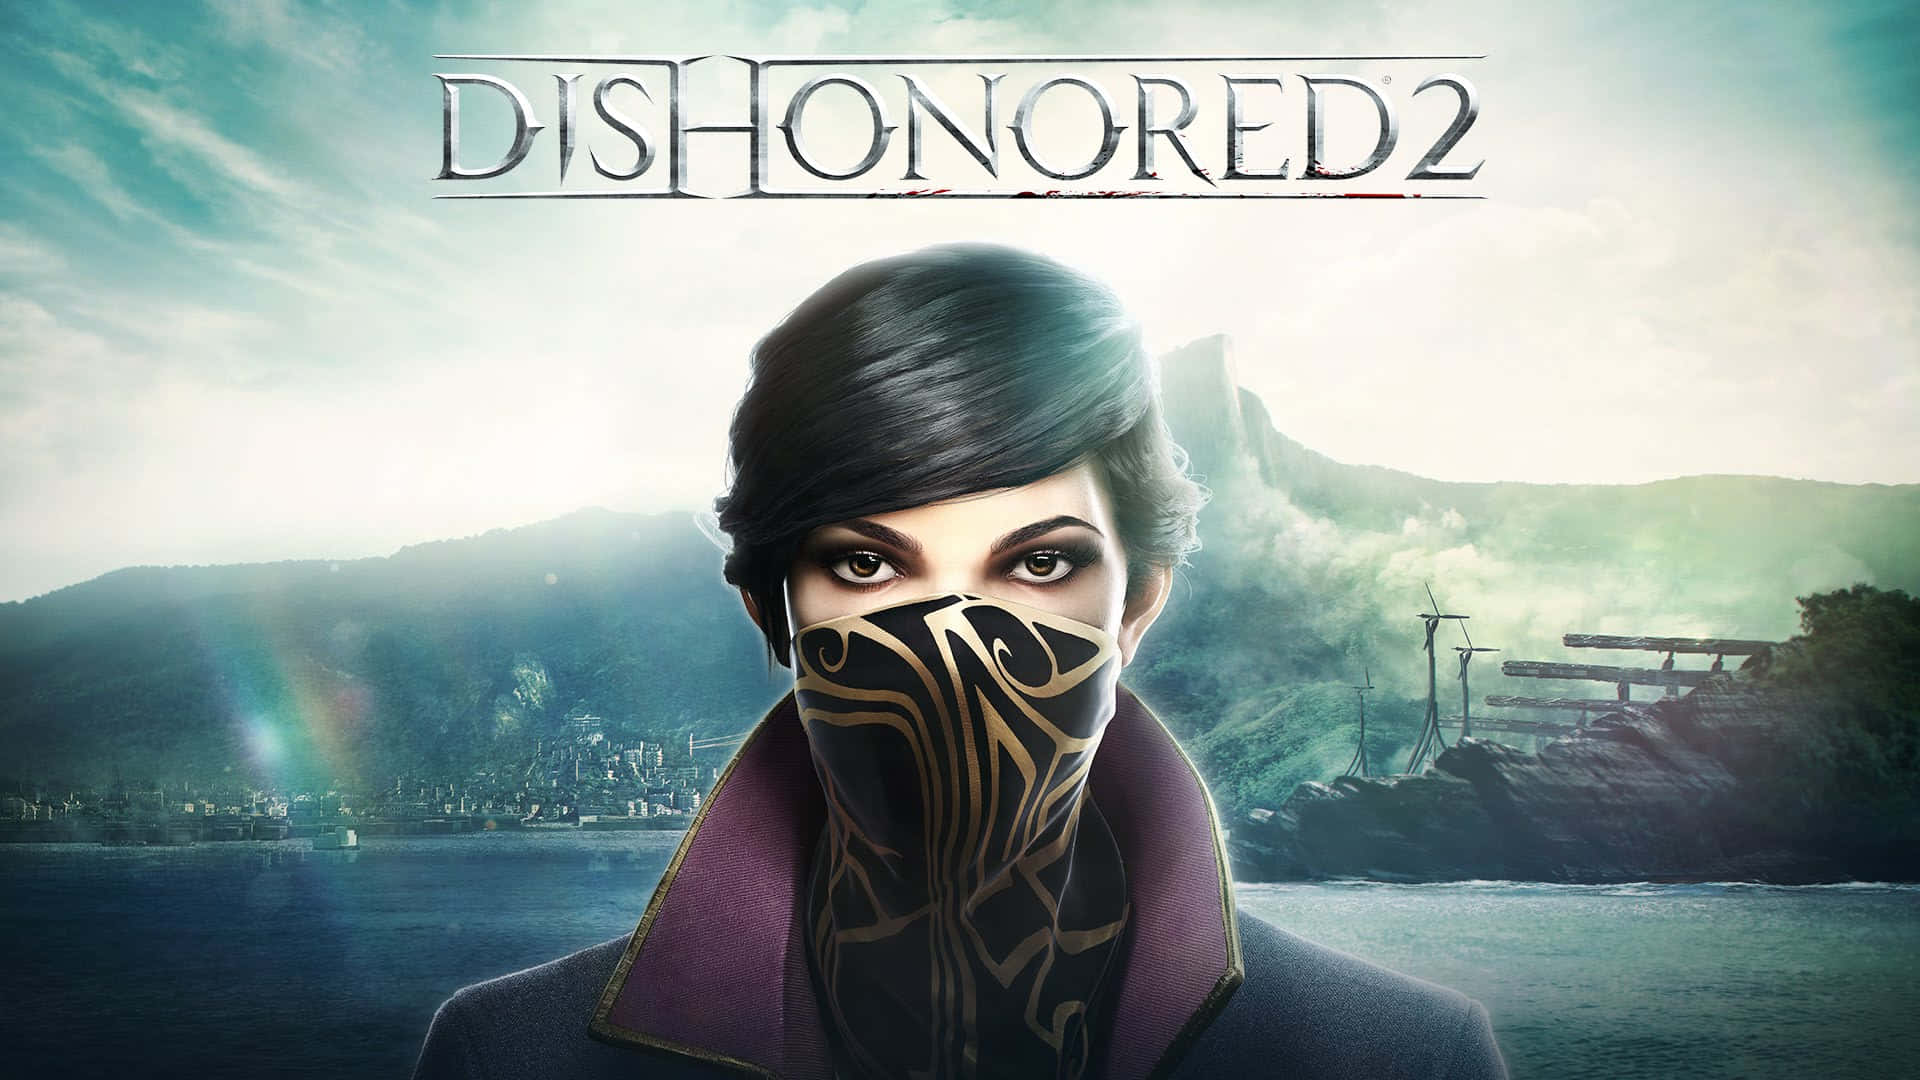 Best Dishonored 2 Background Wallpaper